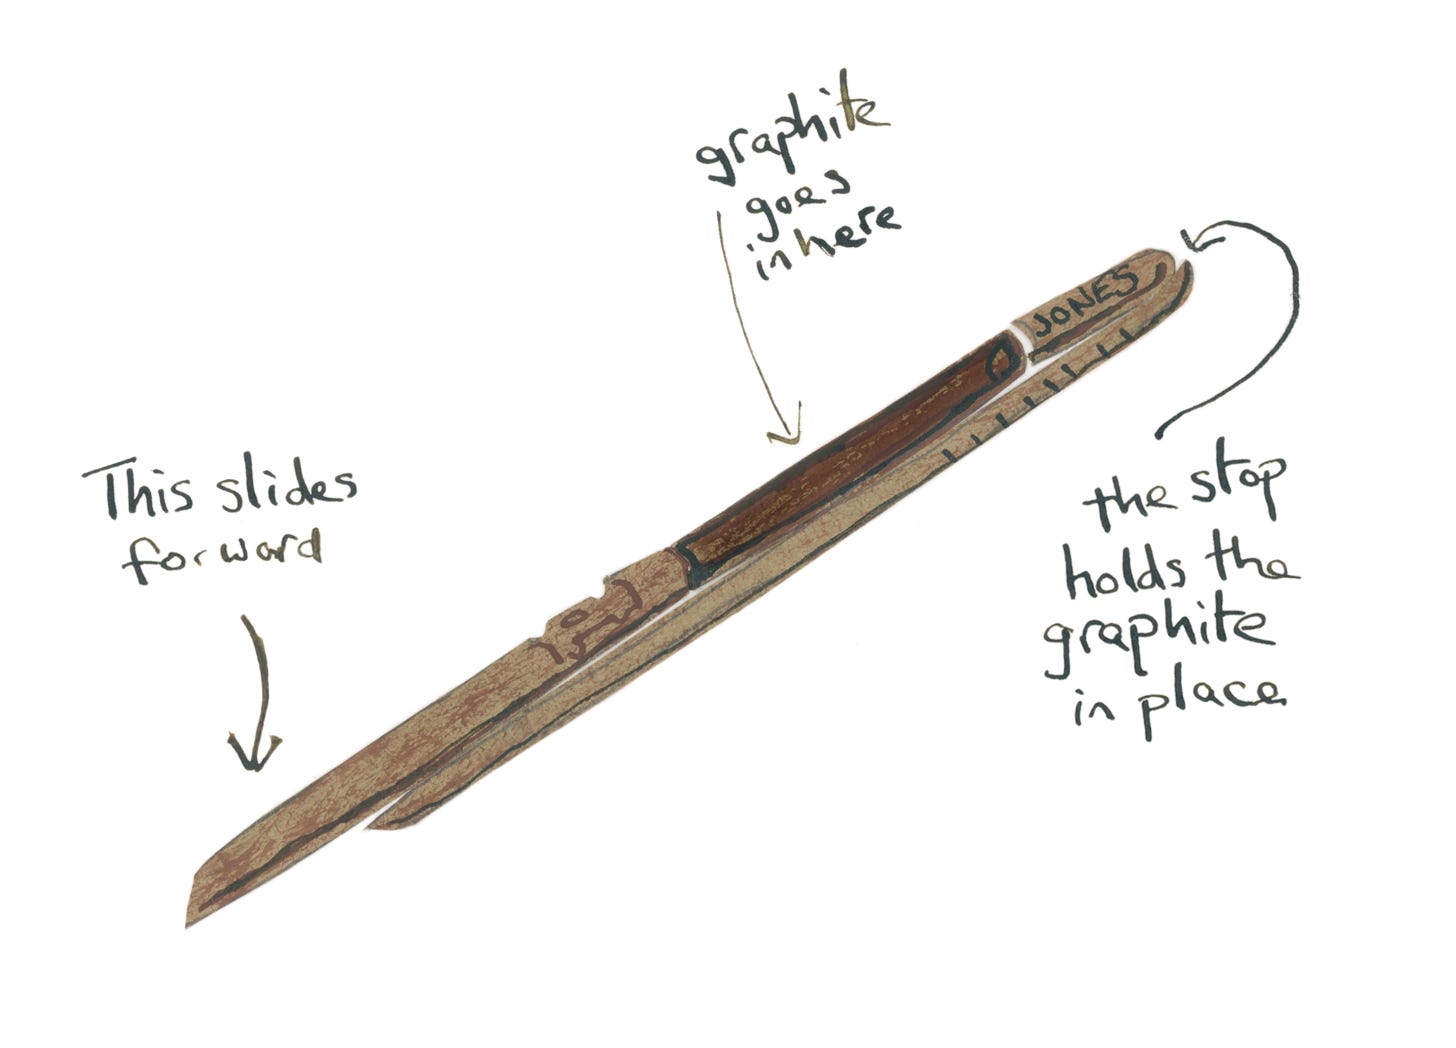 diagram of a pencil with a wooden casing that slides open